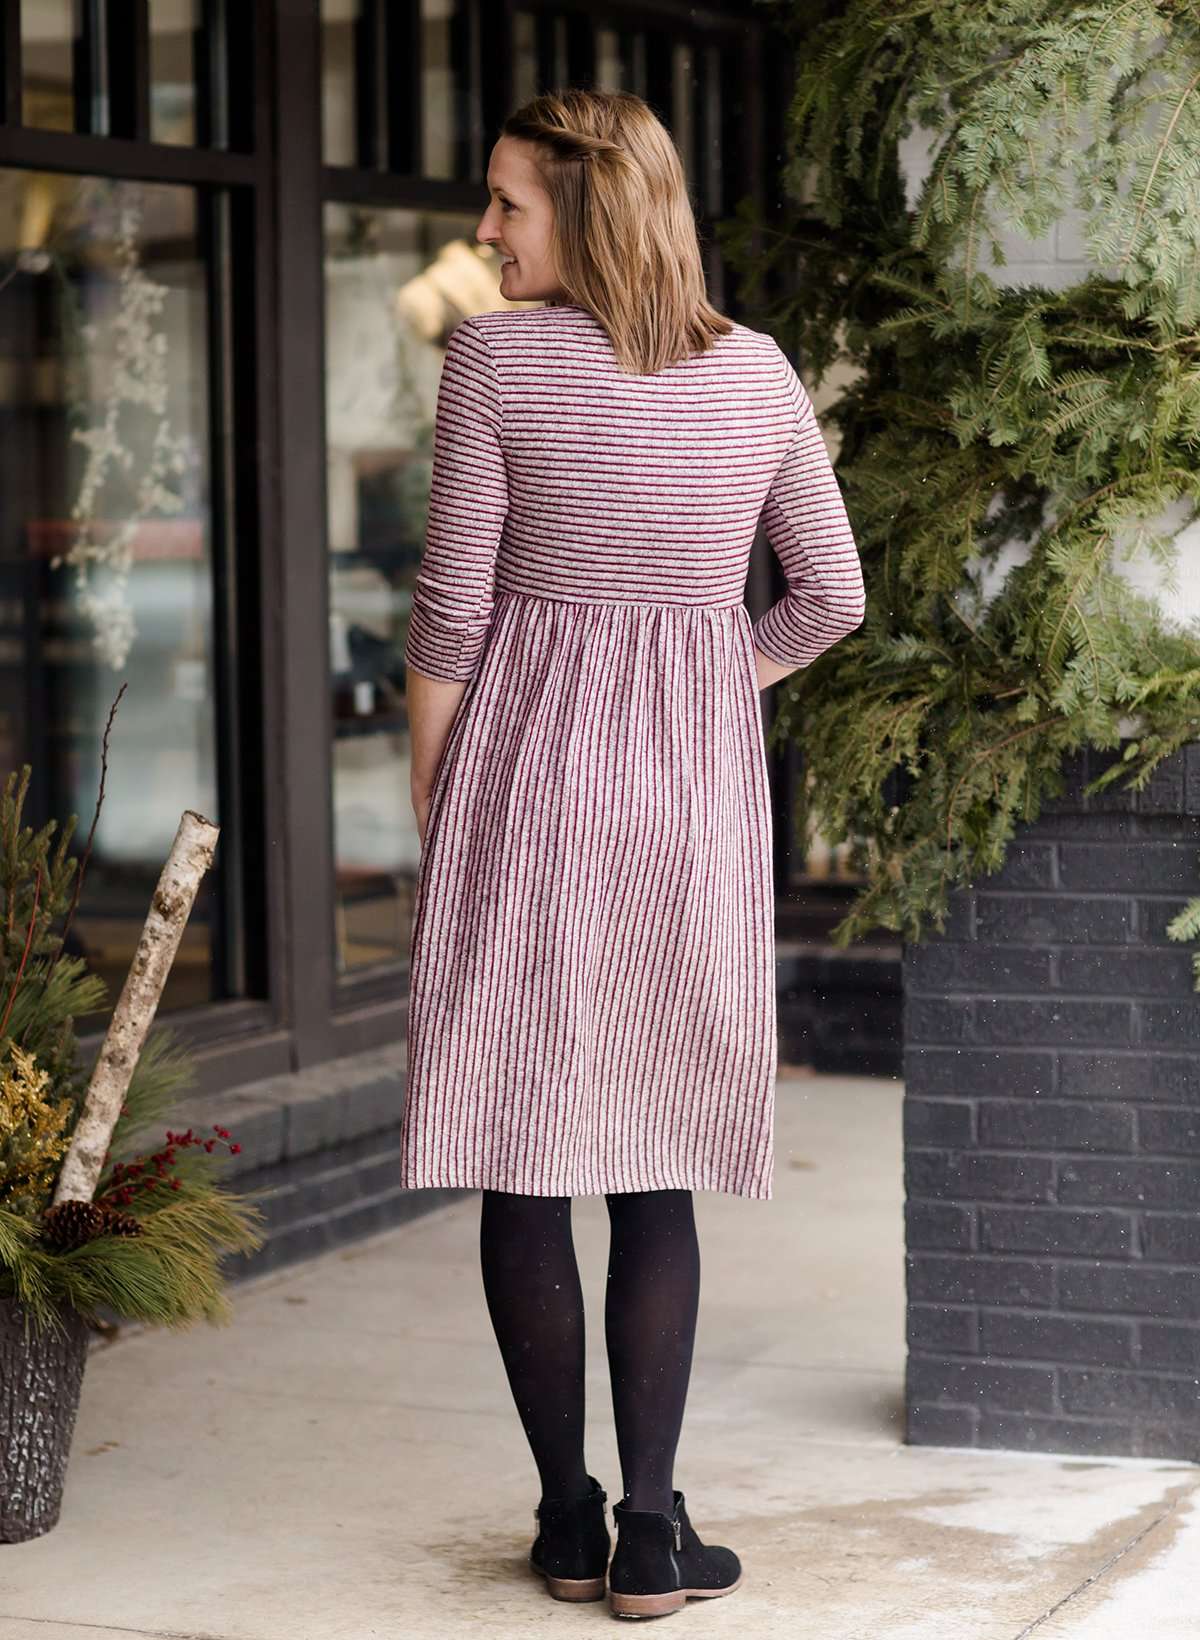 Woman wearing a wine and gray striped modest midi dress with front, square pockets. She also has black leggings and sole society black boots on.